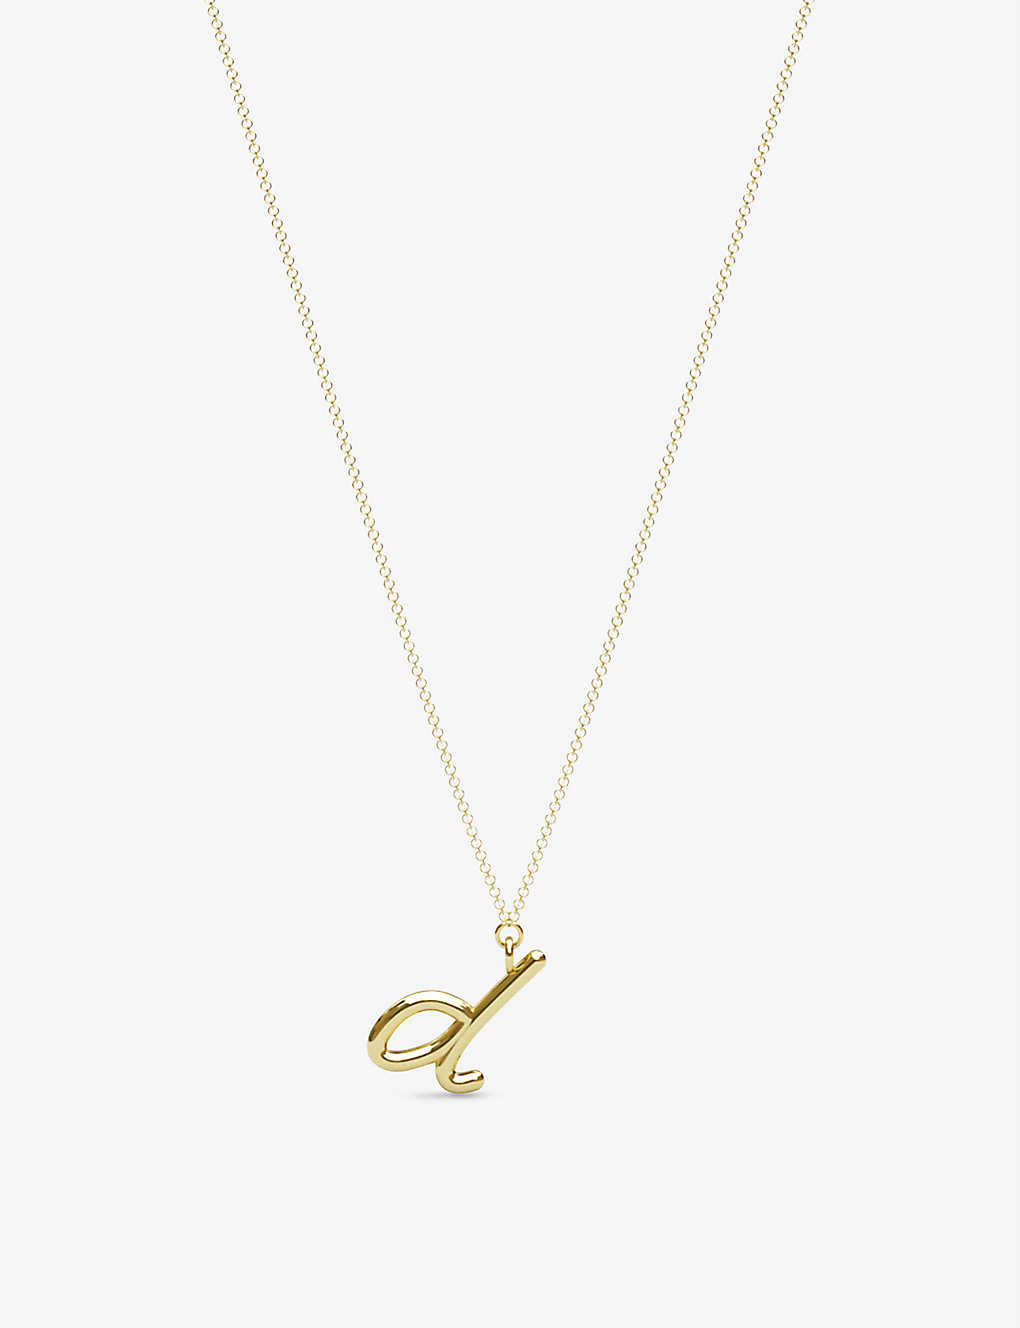 Shop The Alkemistry Womens 18ct Yellow Gold Love Letter D Initial 18ct Yellow-gold Pendant Necklace